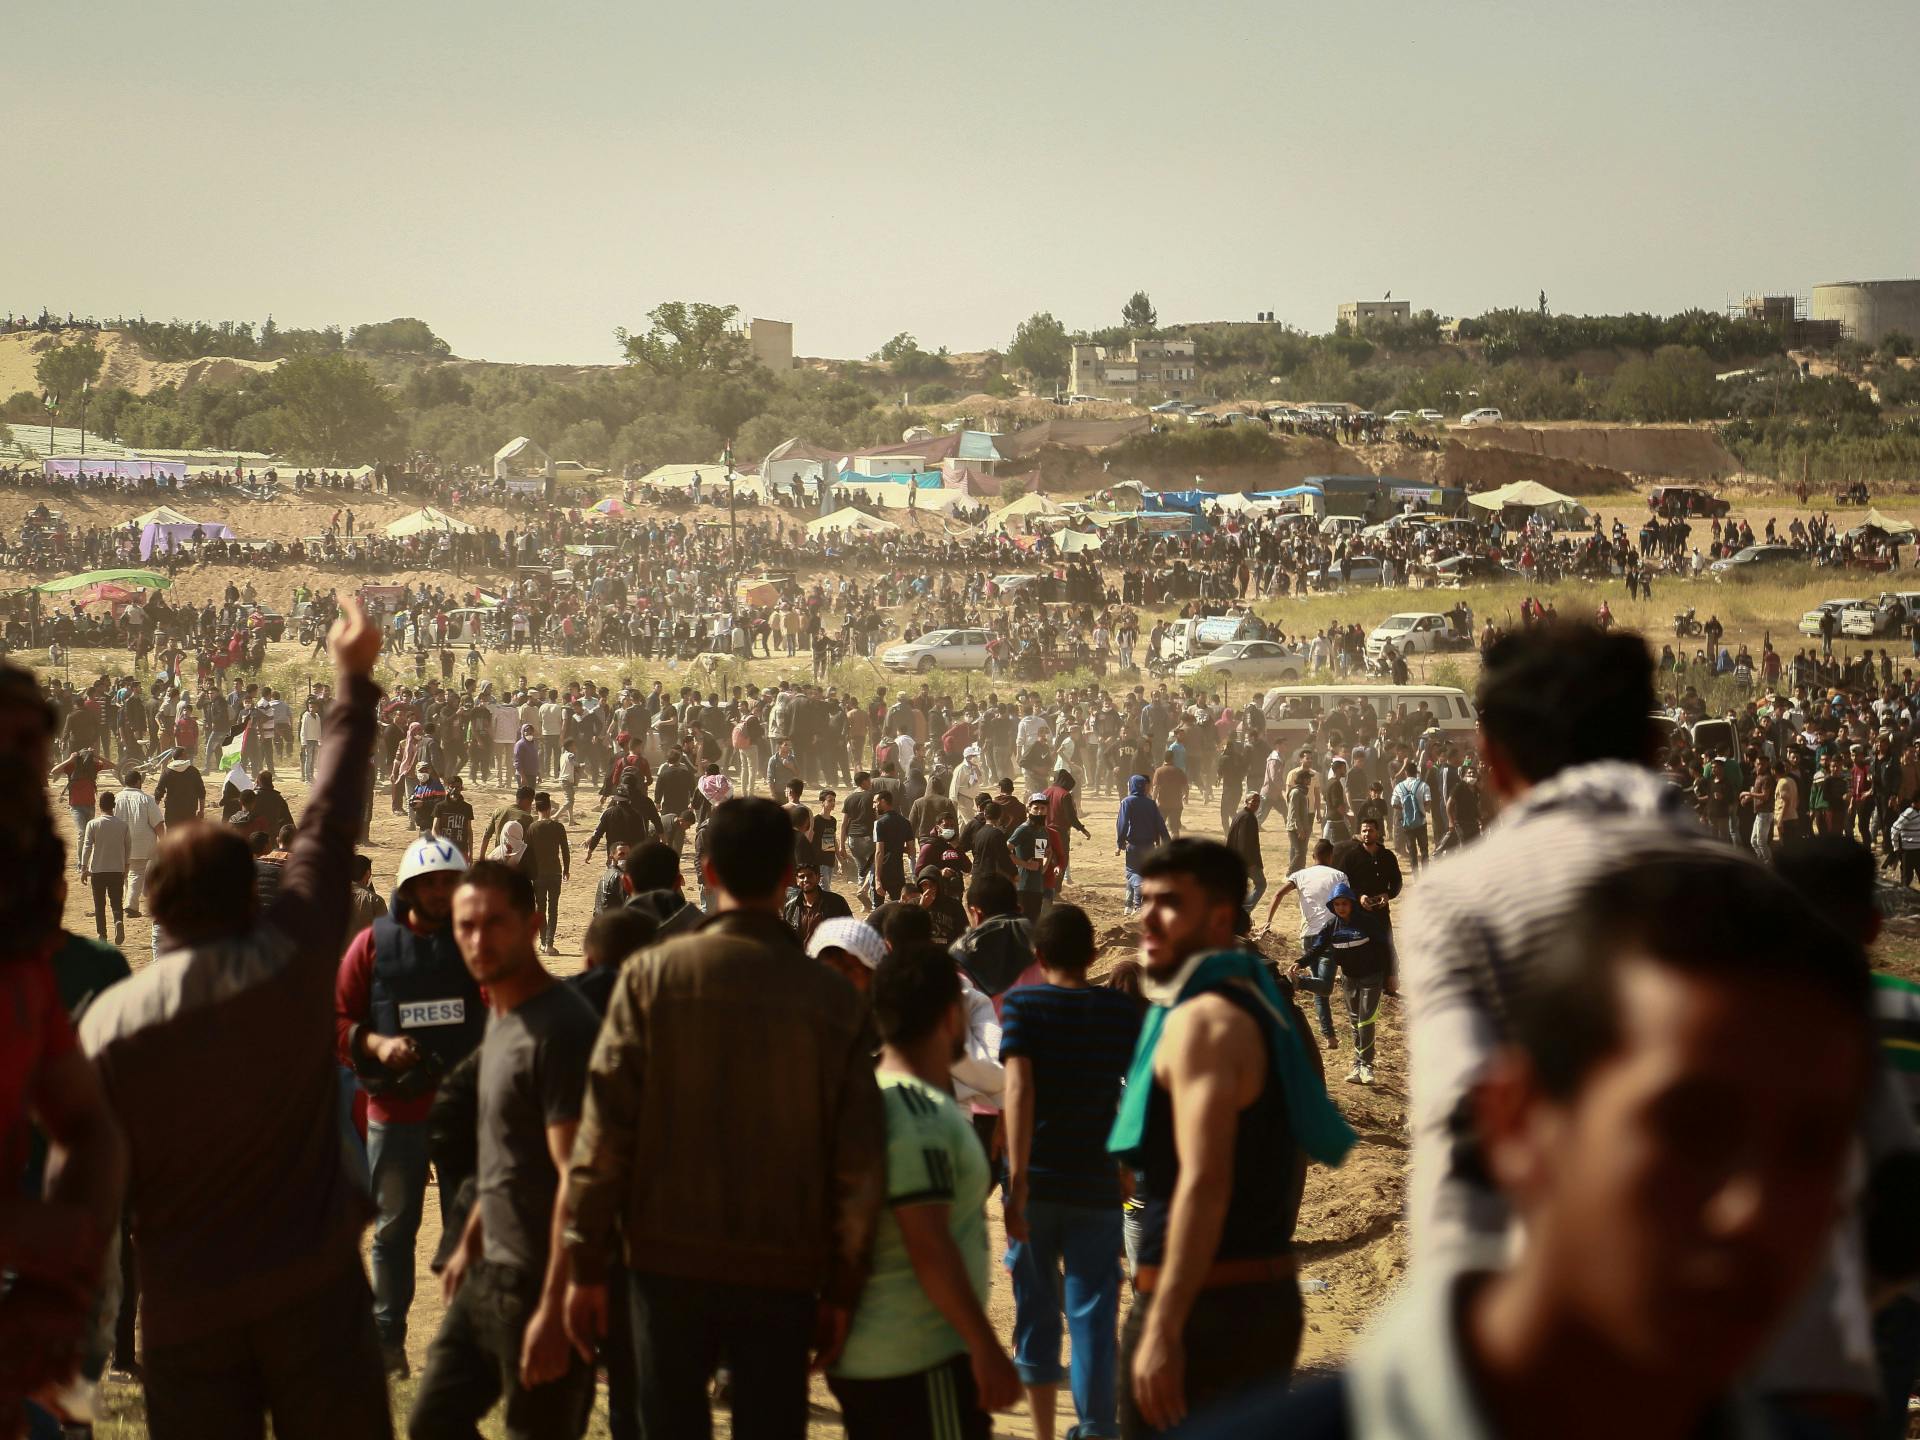 A large group of protesters march on a field in the Gaza Strip.